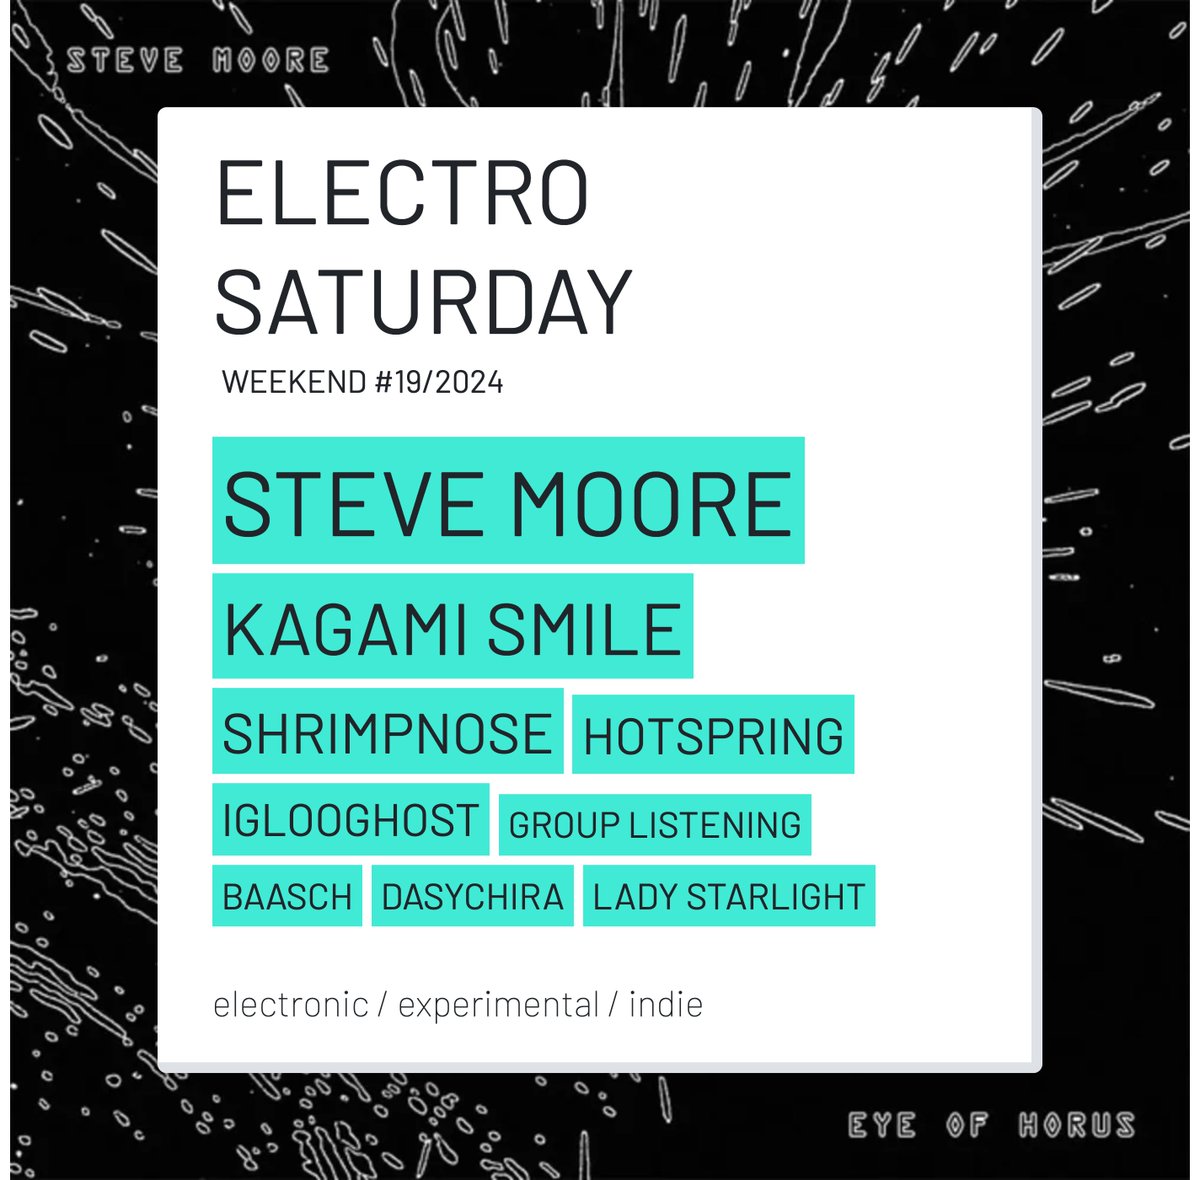 ⚡️⚡️#ELECTROSATURDAY ⚡️⚡️ 🤯🔊WEEKEND #19/2024🚨💣 check out our favourite electro releases hashbrandnew.com/L/179825 1:@stevemoore2600 2:@kagami_smile ⭐️ 3:@shrimpnosebeats 4:#Hotspring 5:@iglooghost 6:@group_listening 7:#Baasch 8:@dasychira 9:#LadyStarlight #brandnewcom #BN